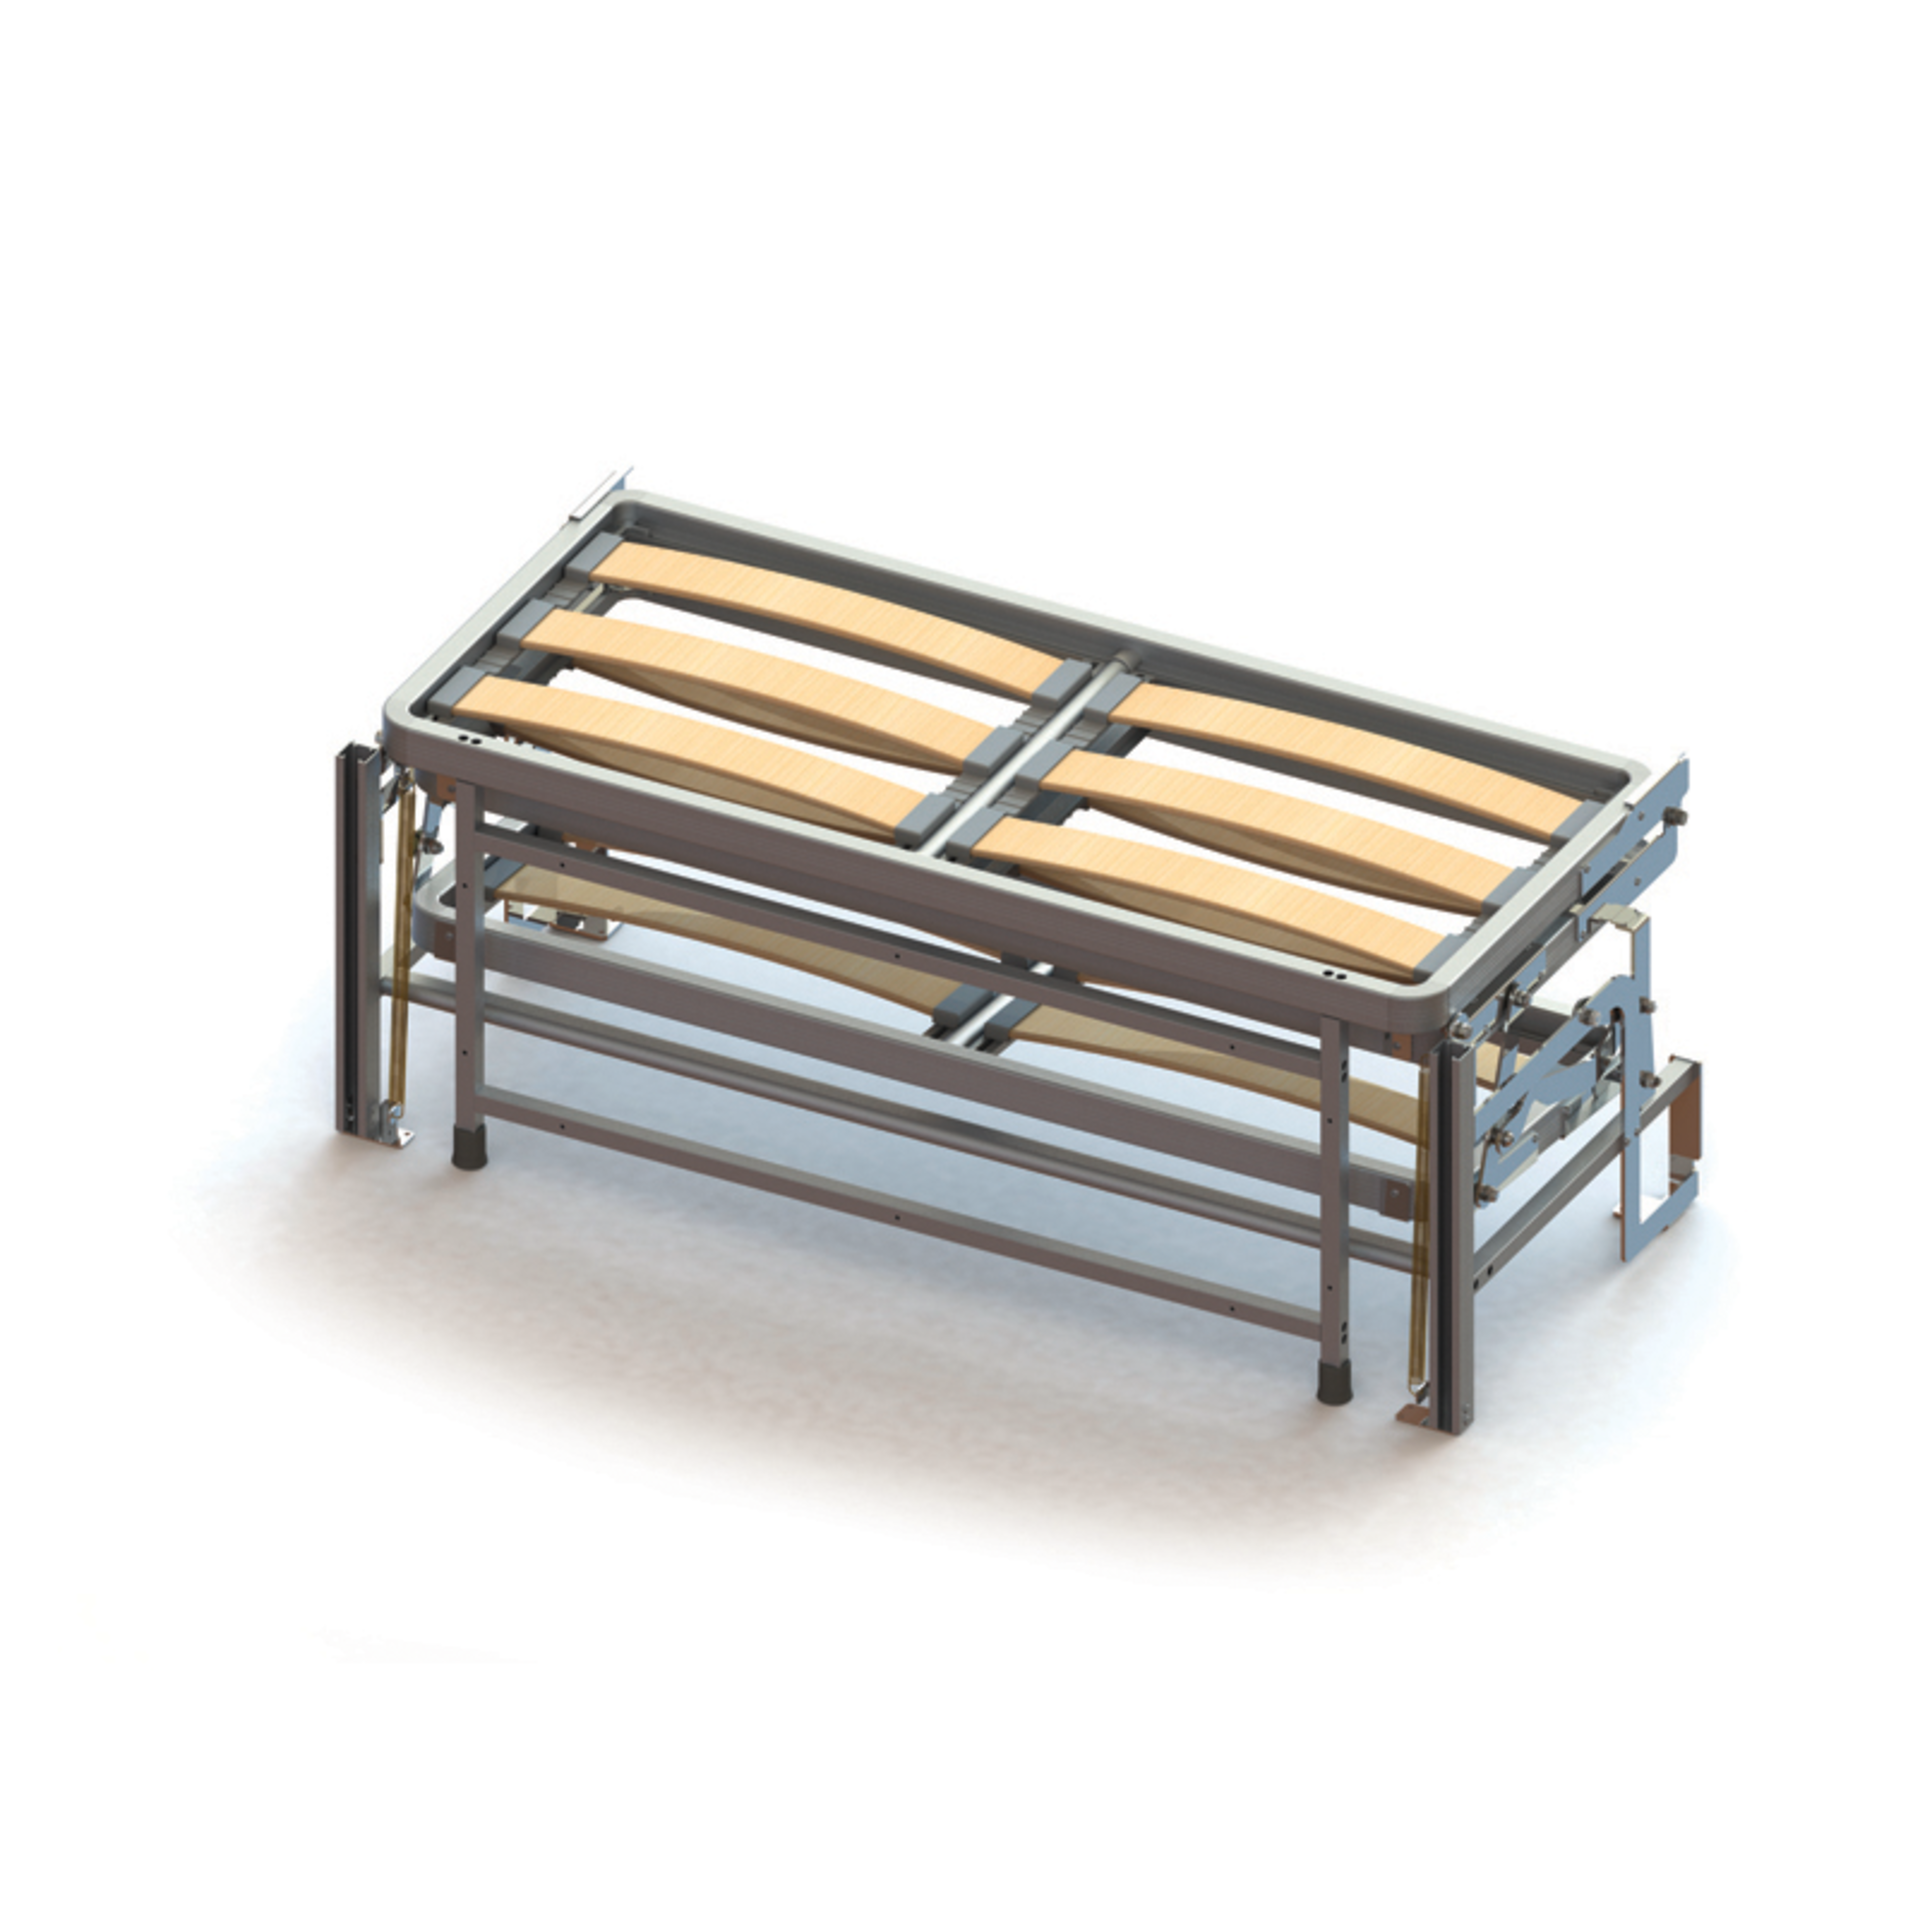 1 x Project 2000 Pull Out Seating Bench and Bed Frame For Caravans or Campervans - Height 40 x Width - Image 2 of 11